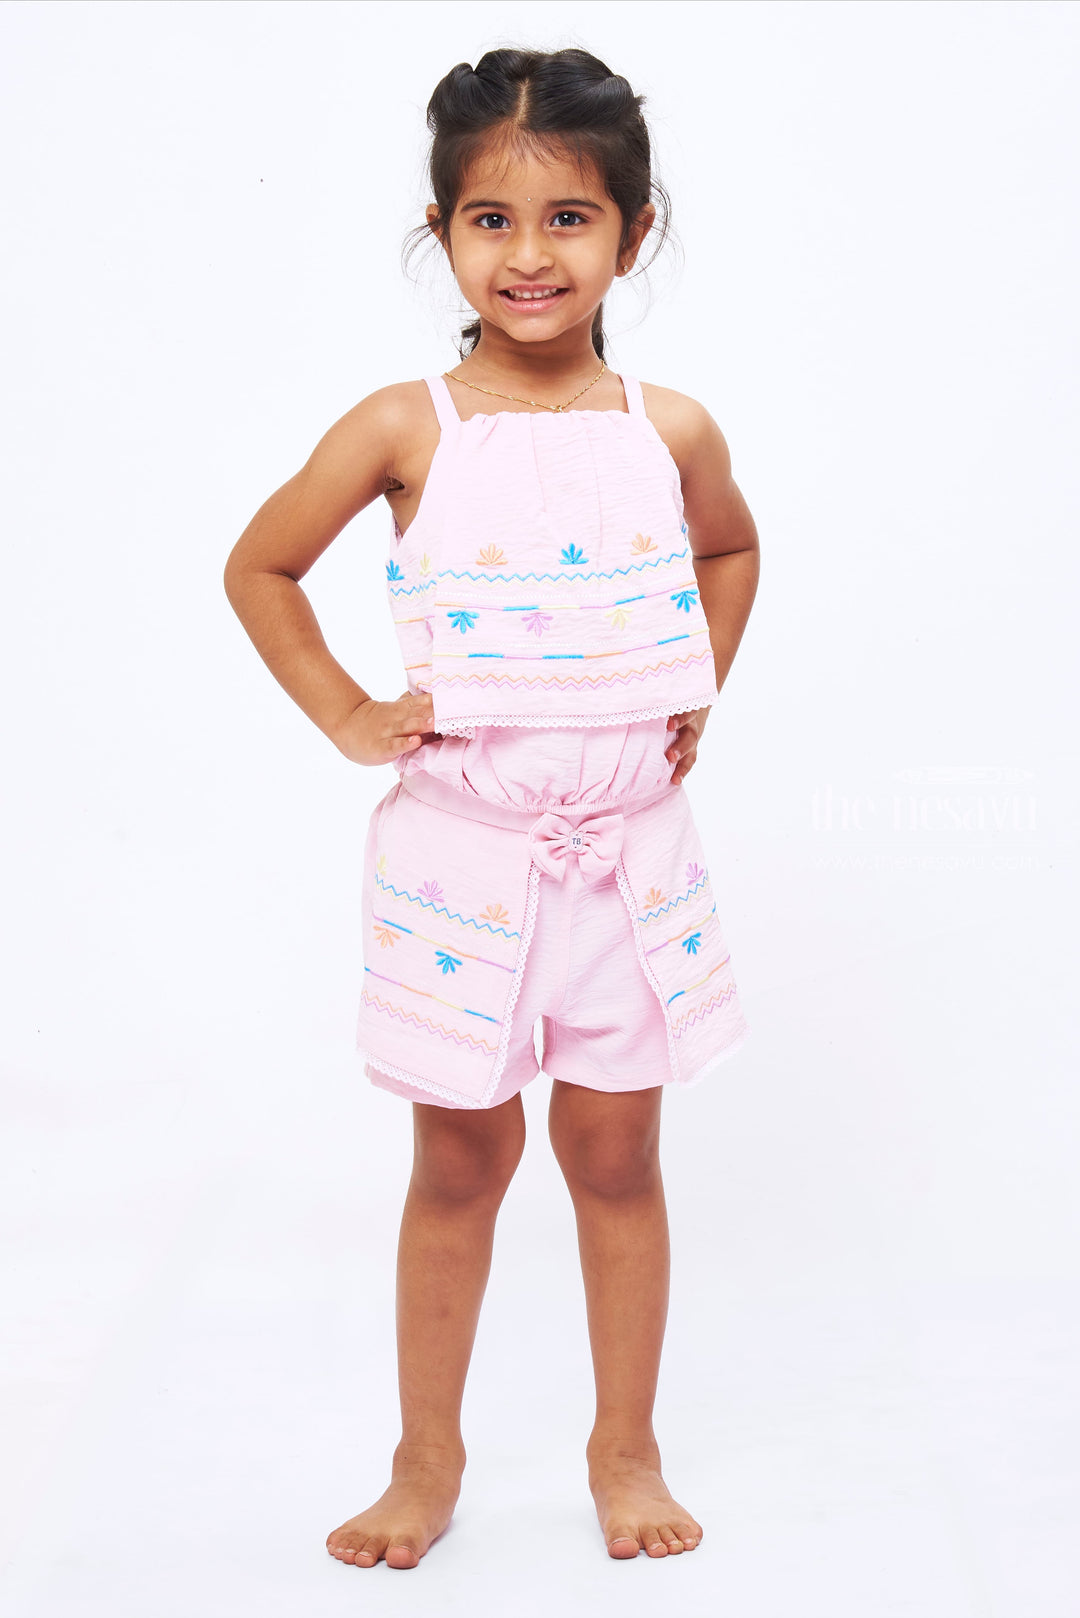 The Nesavu Baby Casual Sets Girls Pink Embroidered Top and Shorts Set - Charming Summer Ensemble Nesavu 18 (2Y) / Pink BFJ511C-18 Embroidered Summer Top and Shorts Set for Girls | Pink Playwear | The Nesavu